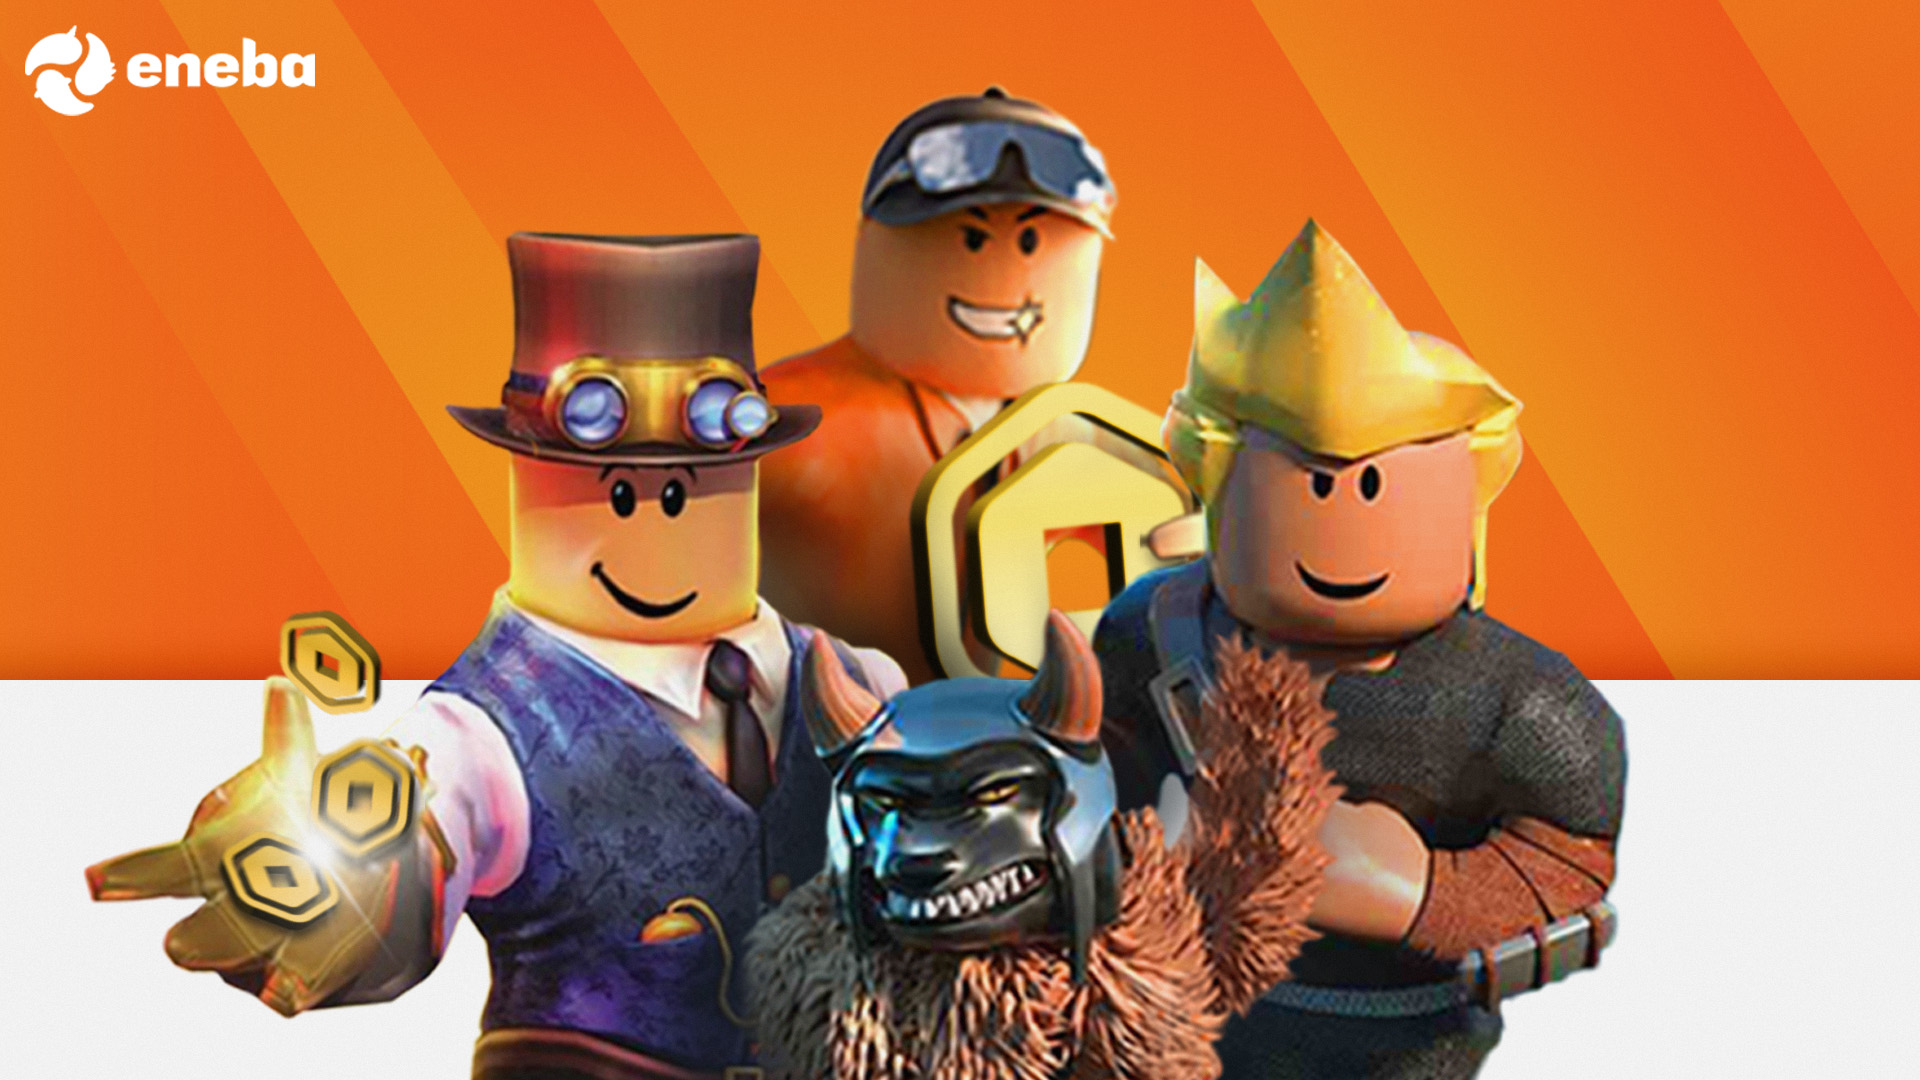 Cheap Roblox gift cards